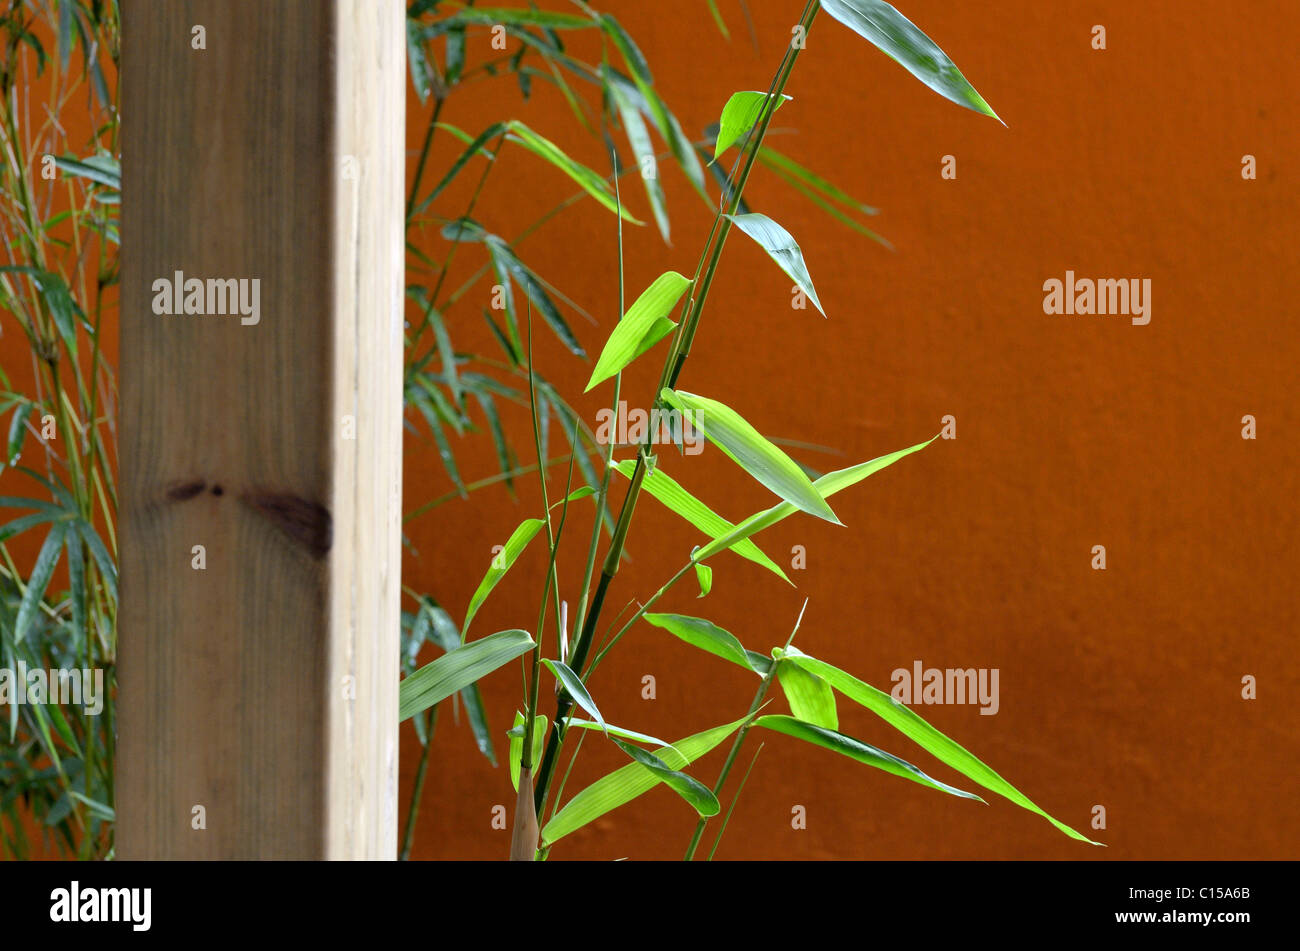 detail of bamboo's leaves Stock Photo